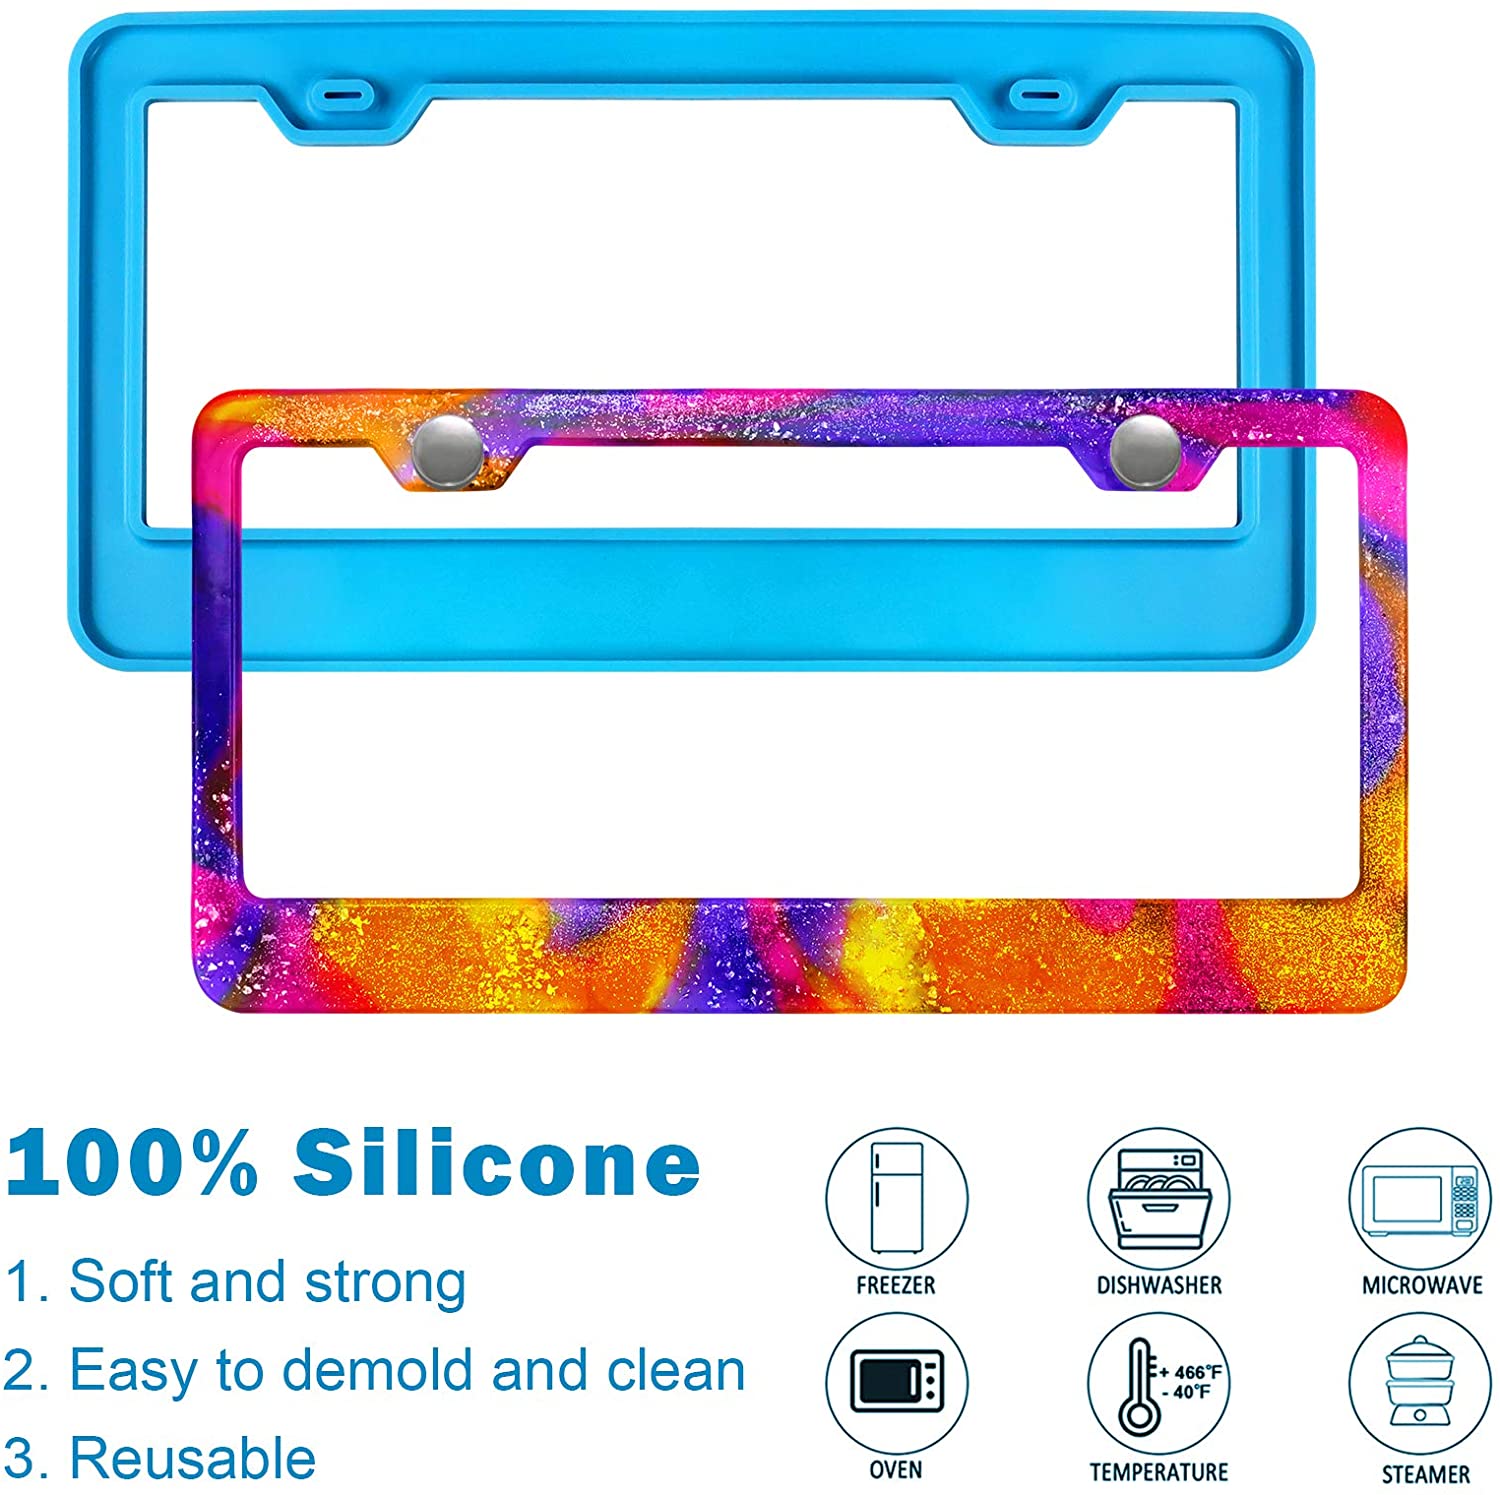 HUISHU 2pcs New Blue DIY Craft Handmade Car Motorcycle Epoxy Silicone Mold License Plate Frame Resin Mold Frame